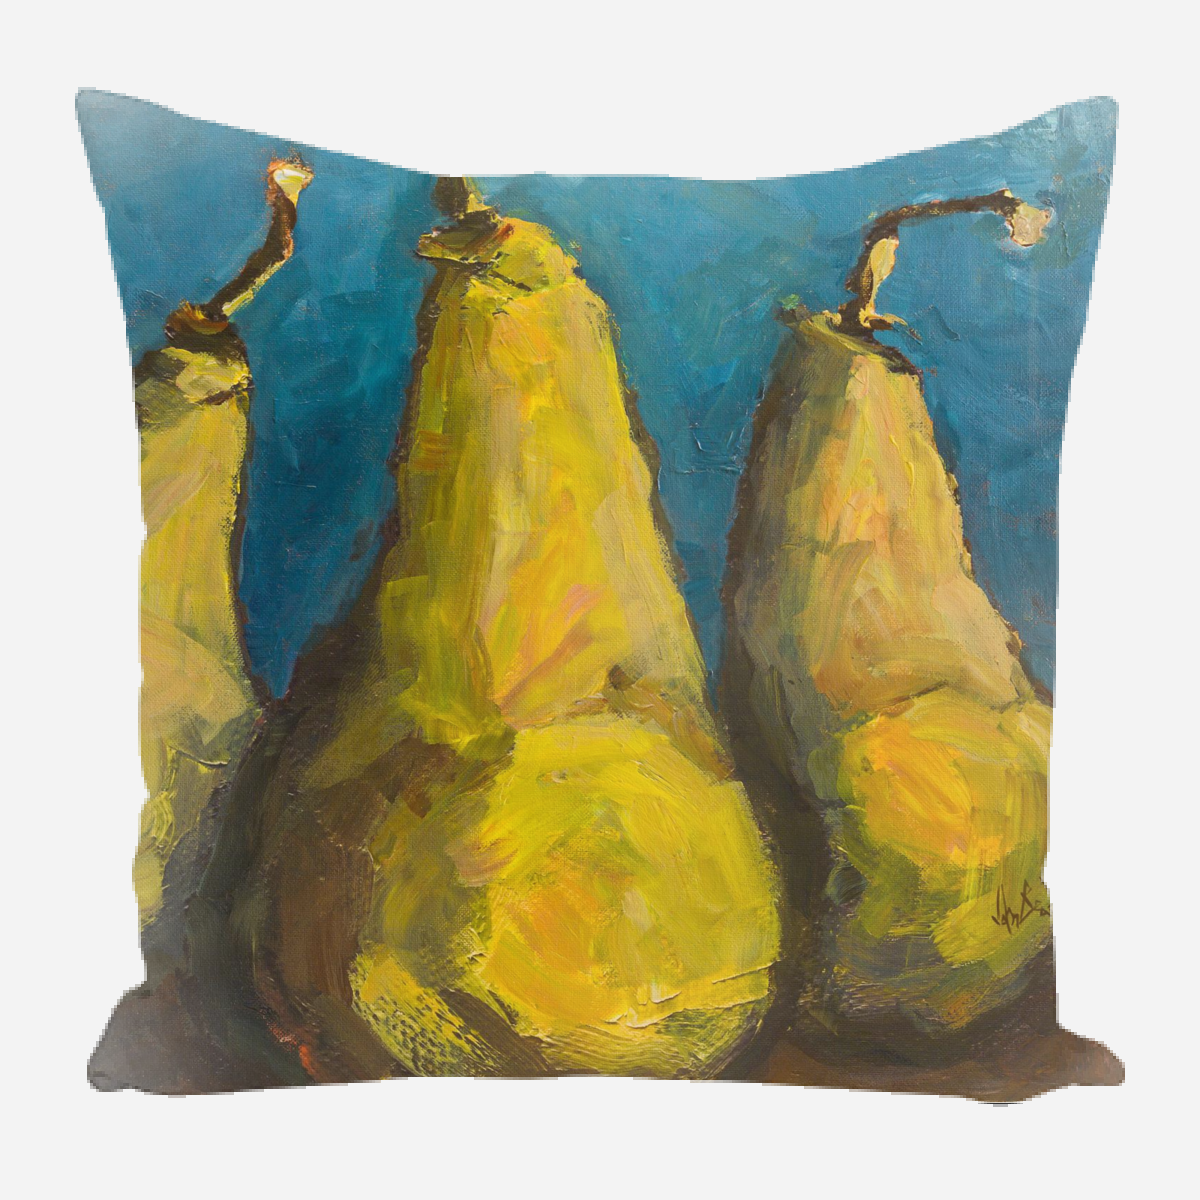 Pears with Teal Pillow